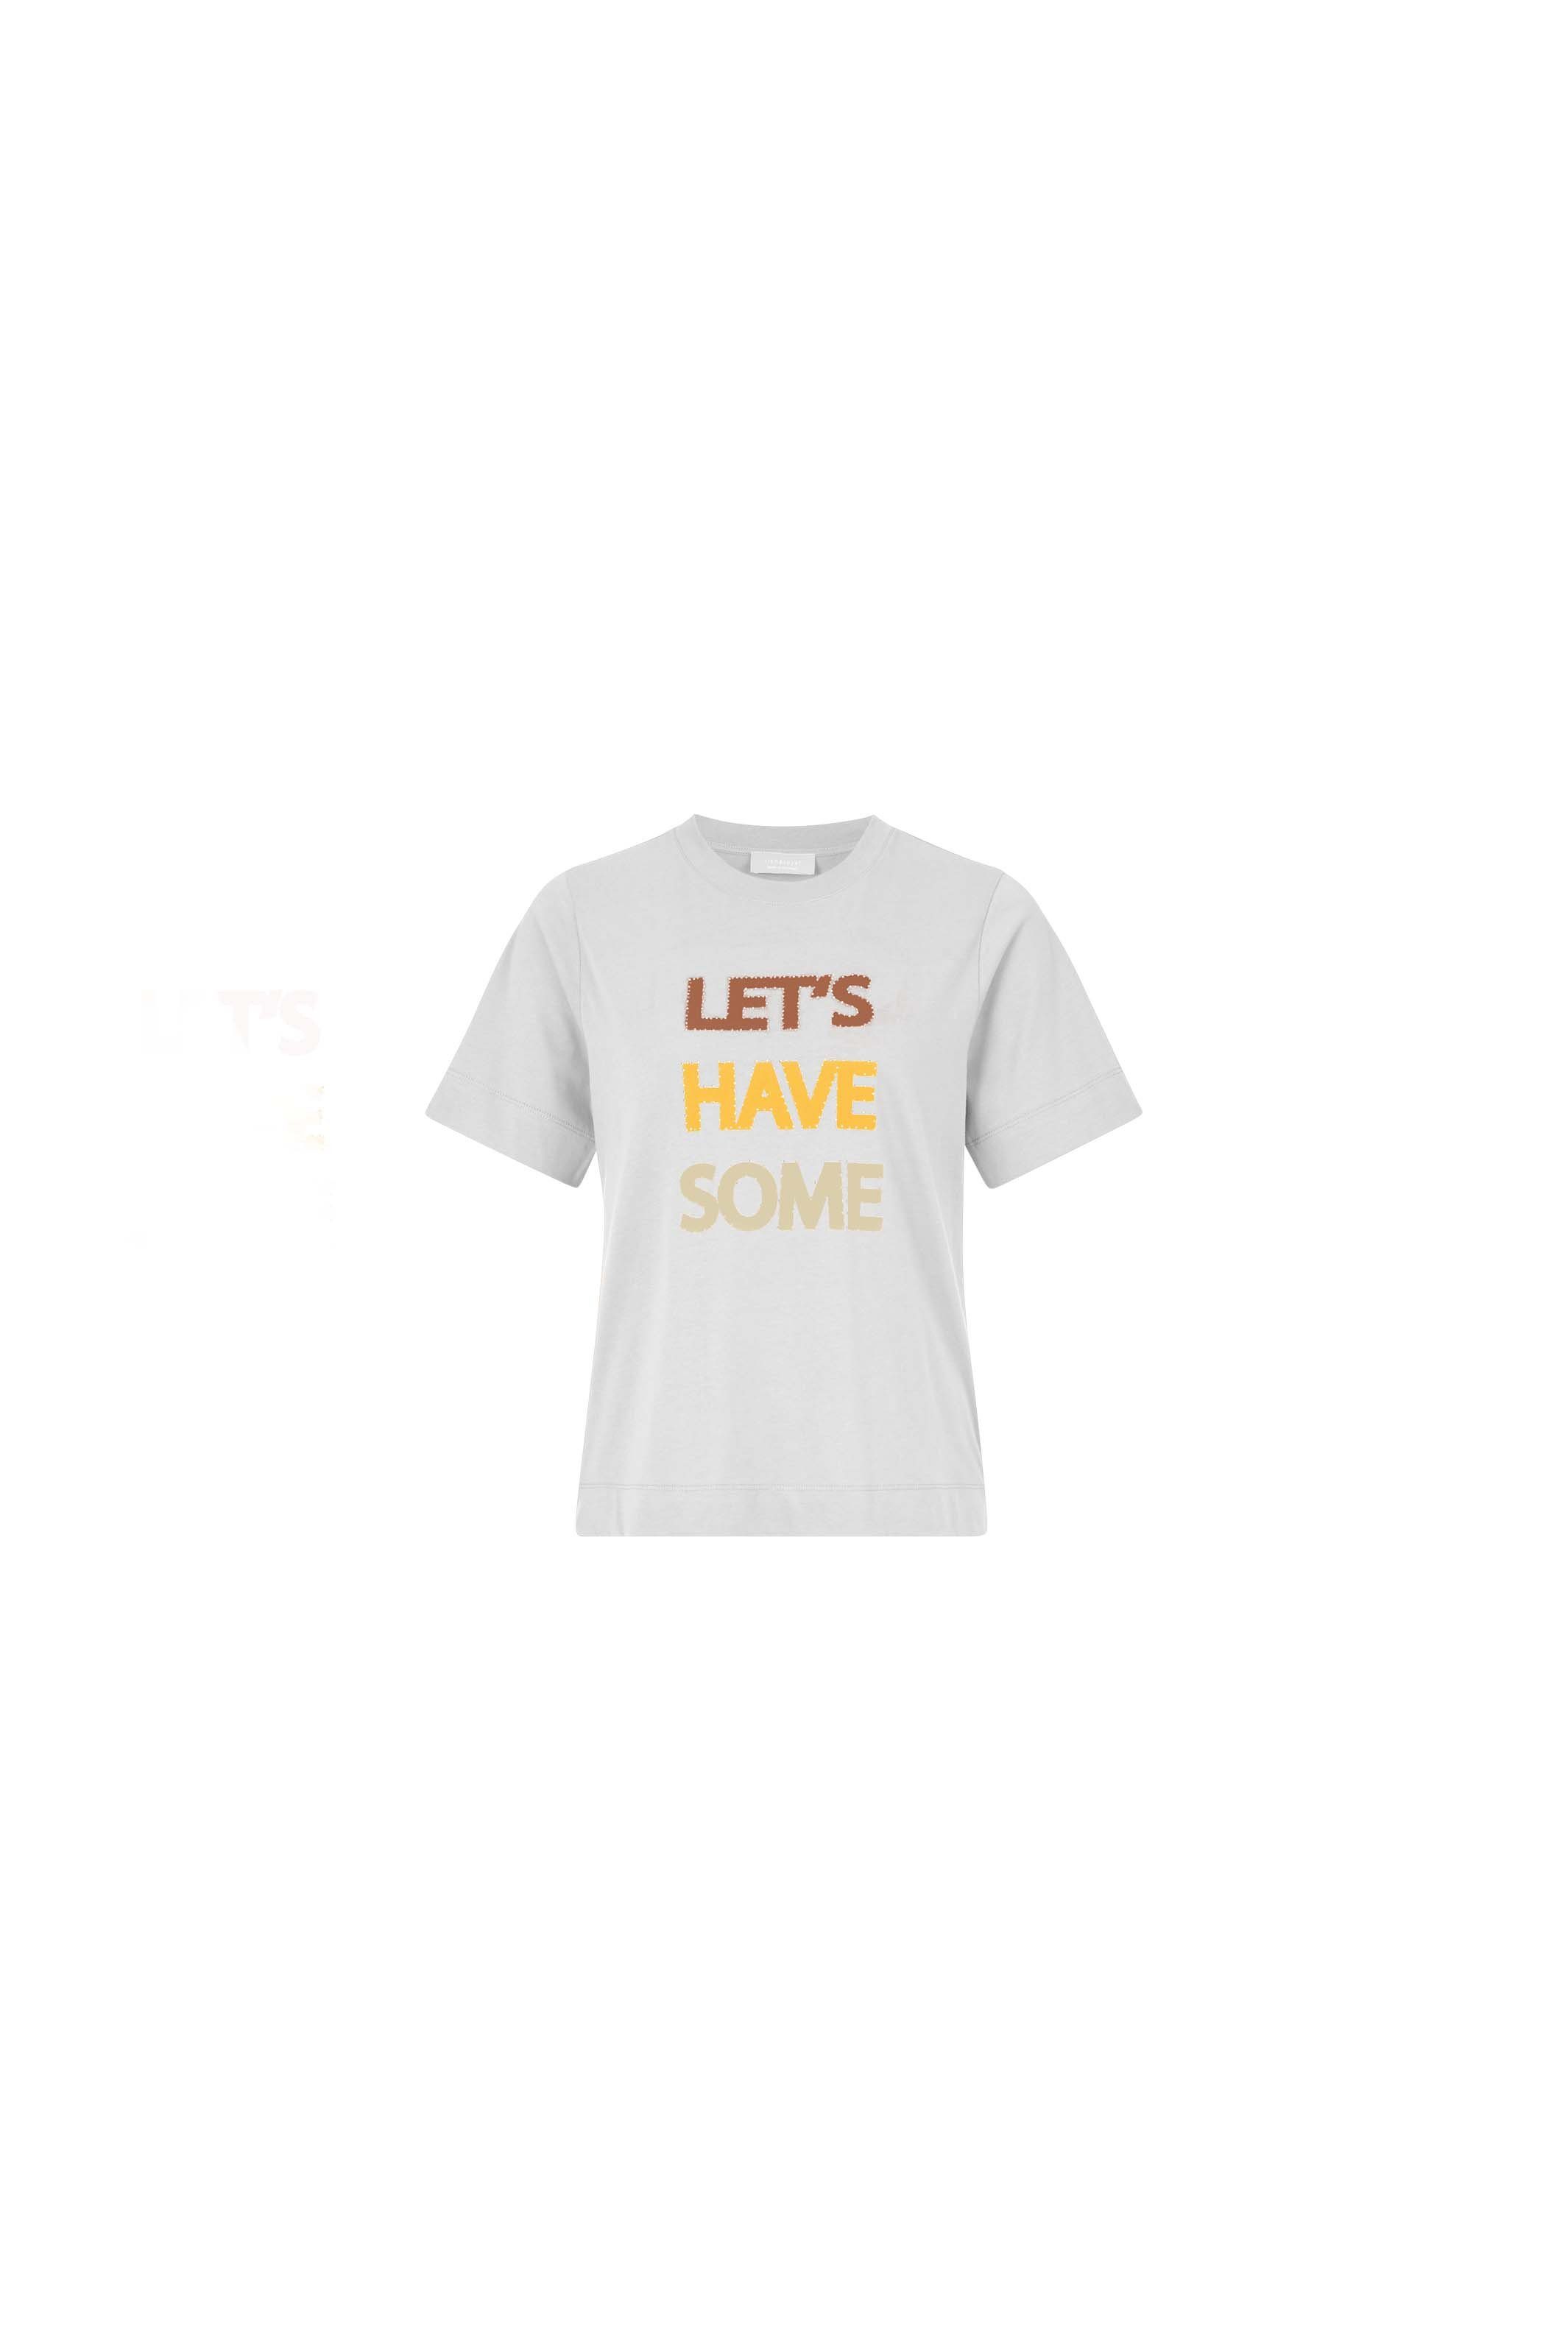 Rich & Royal T-Shirt T-Shirt let's have some